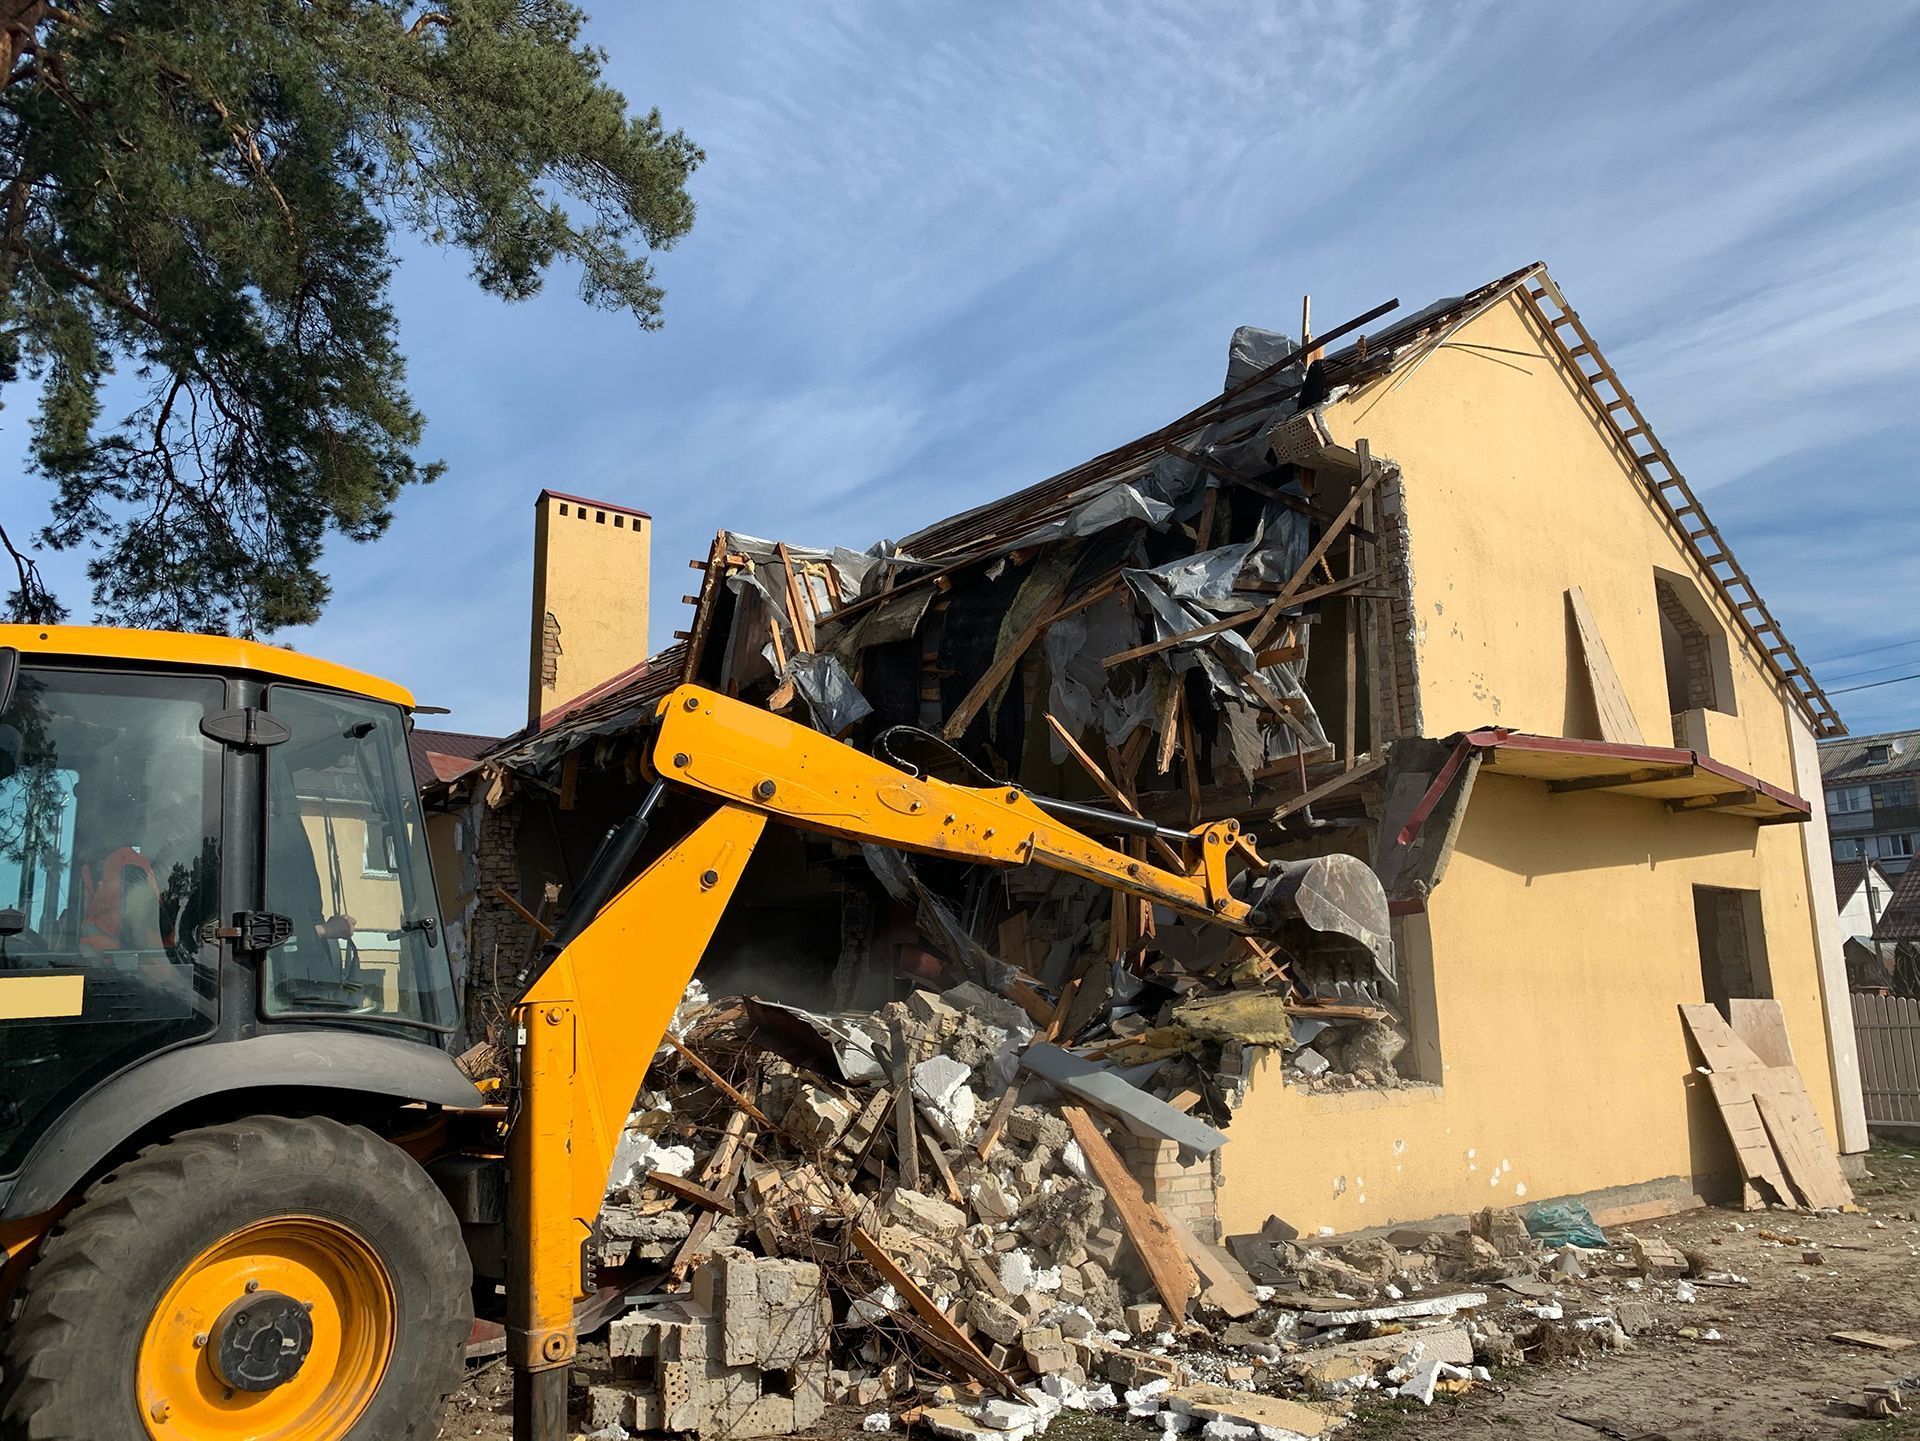 a yellow tractor is demolishing a yellow house